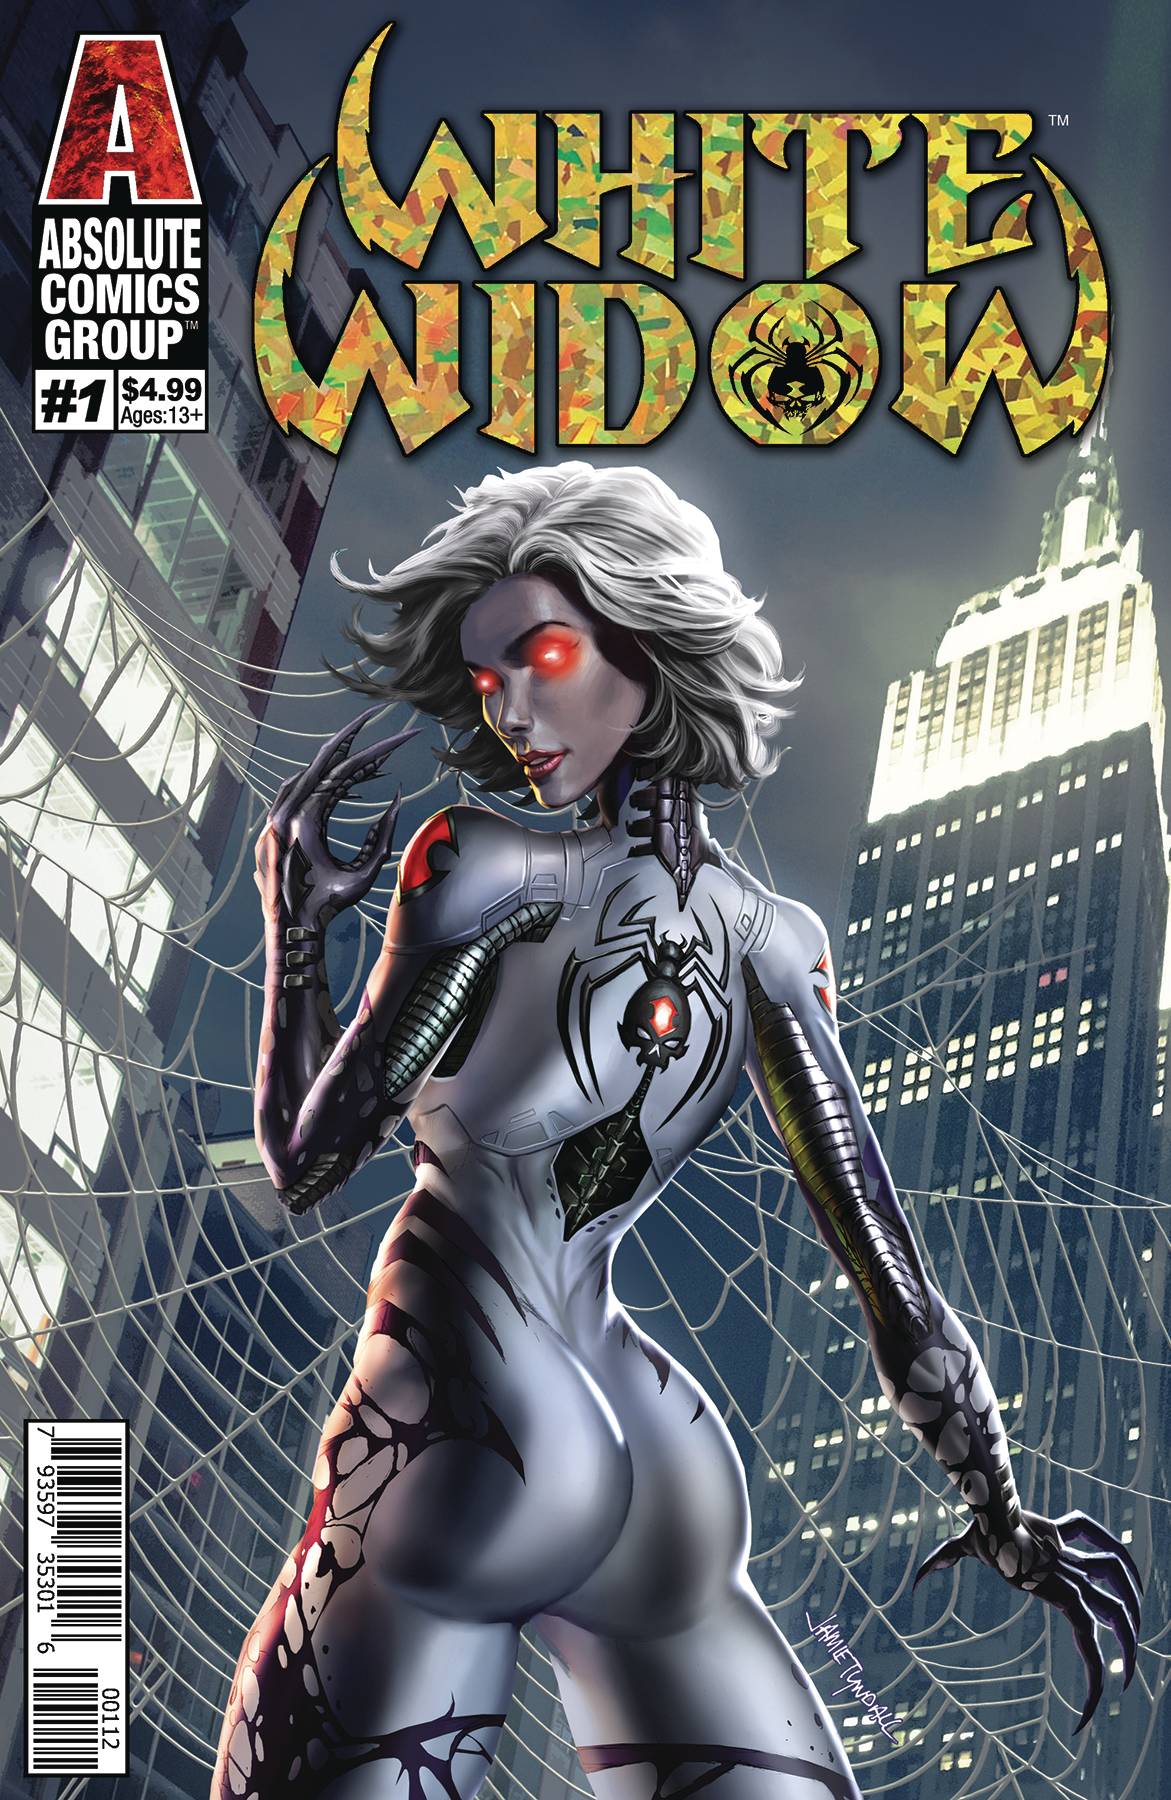 WHITE WIDOW #1 2ND PTG CVR A FOIL TITLE TREATMENT SIGNED BY BENNY POWELL & JAMIE TYNDALL